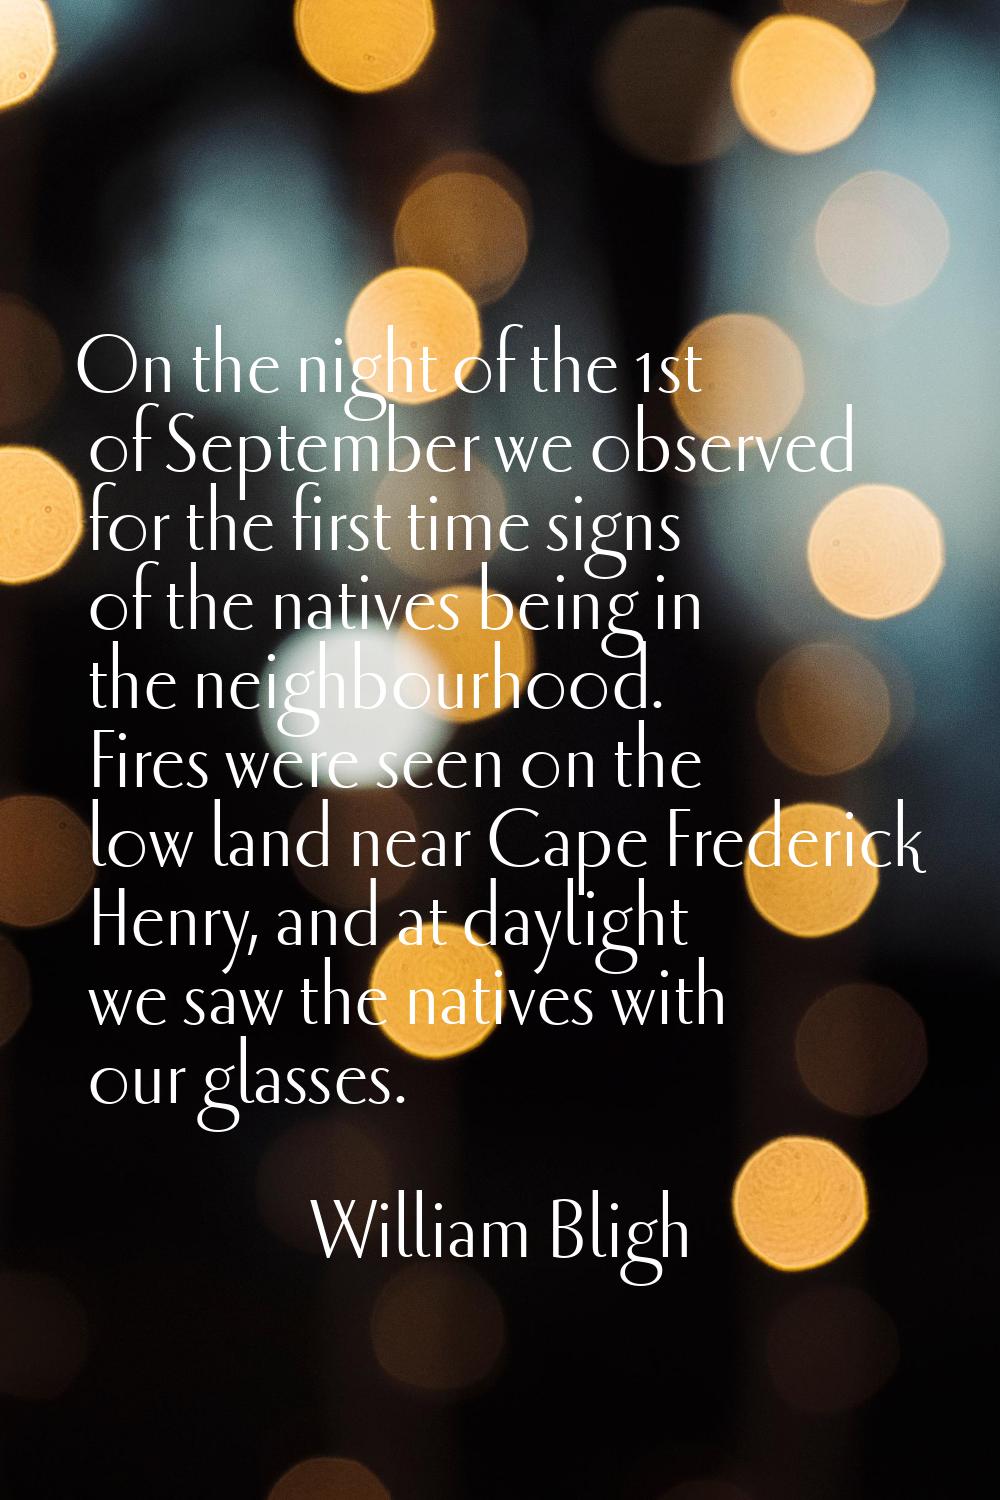 On the night of the 1st of September we observed for the first time signs of the natives being in t